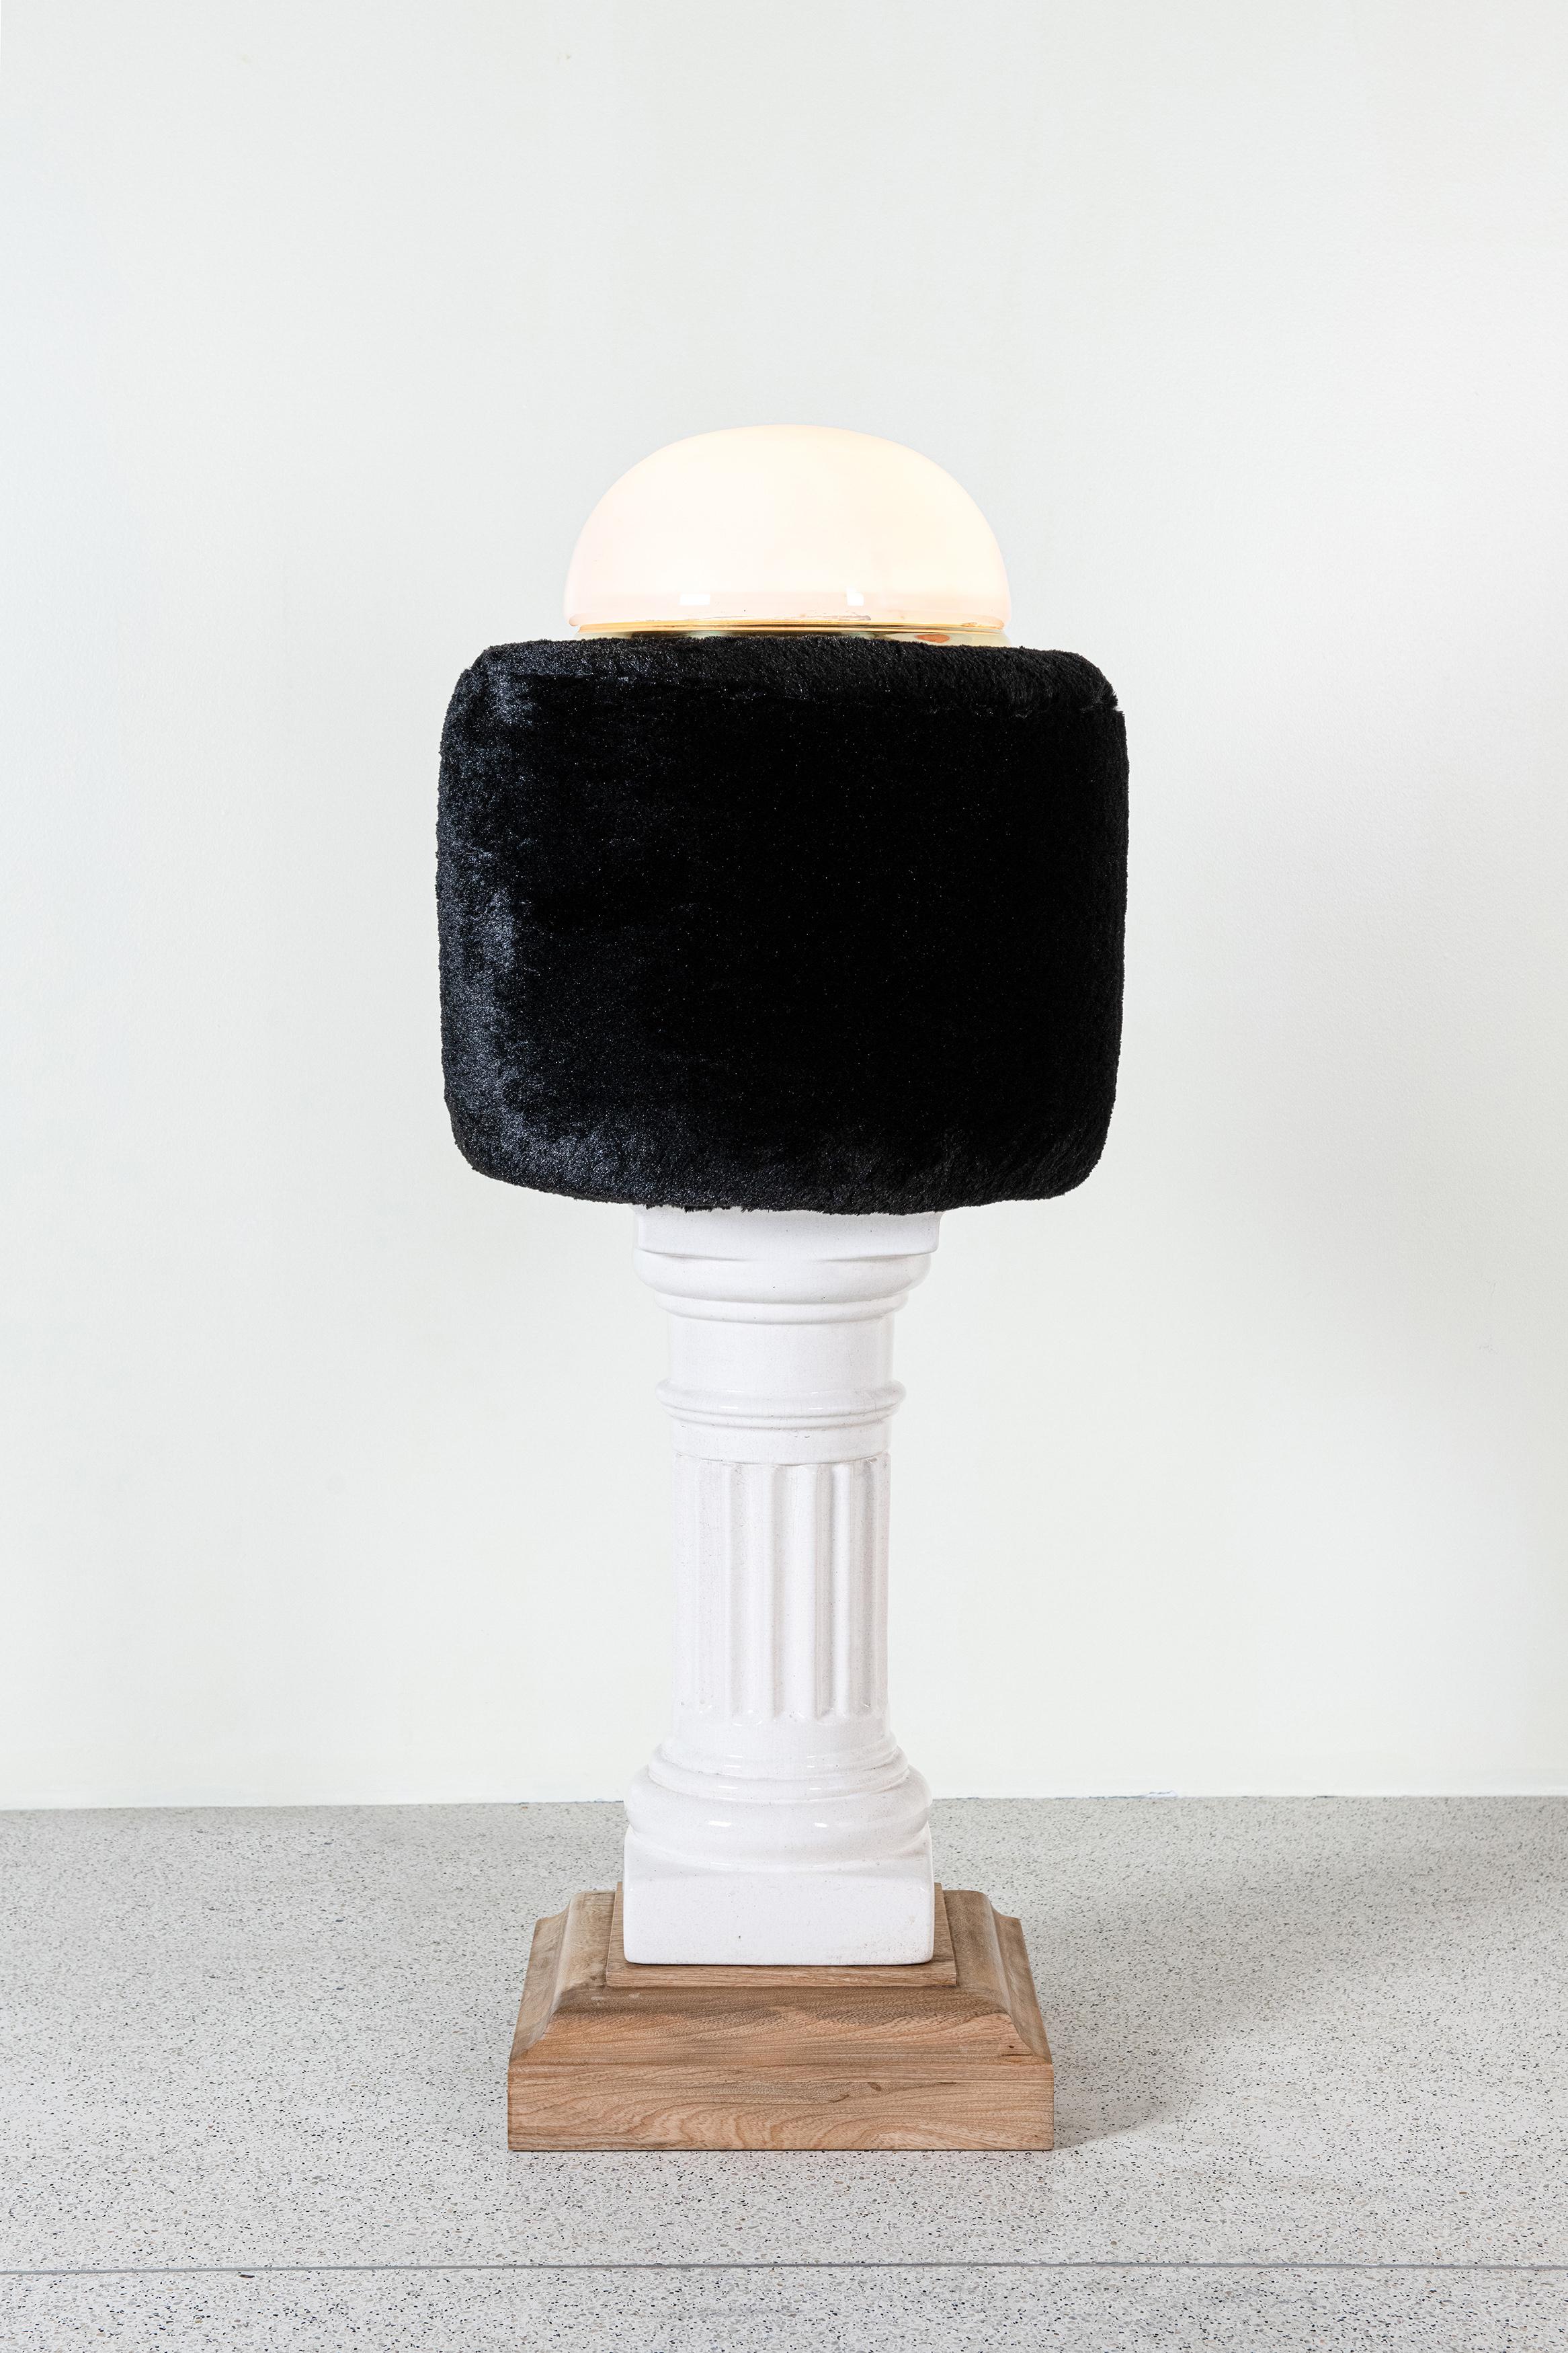 Ceramic, wood, glass and imitation fur floor lamp by Daniel Basso, Argentina, 2020.
Titled: 